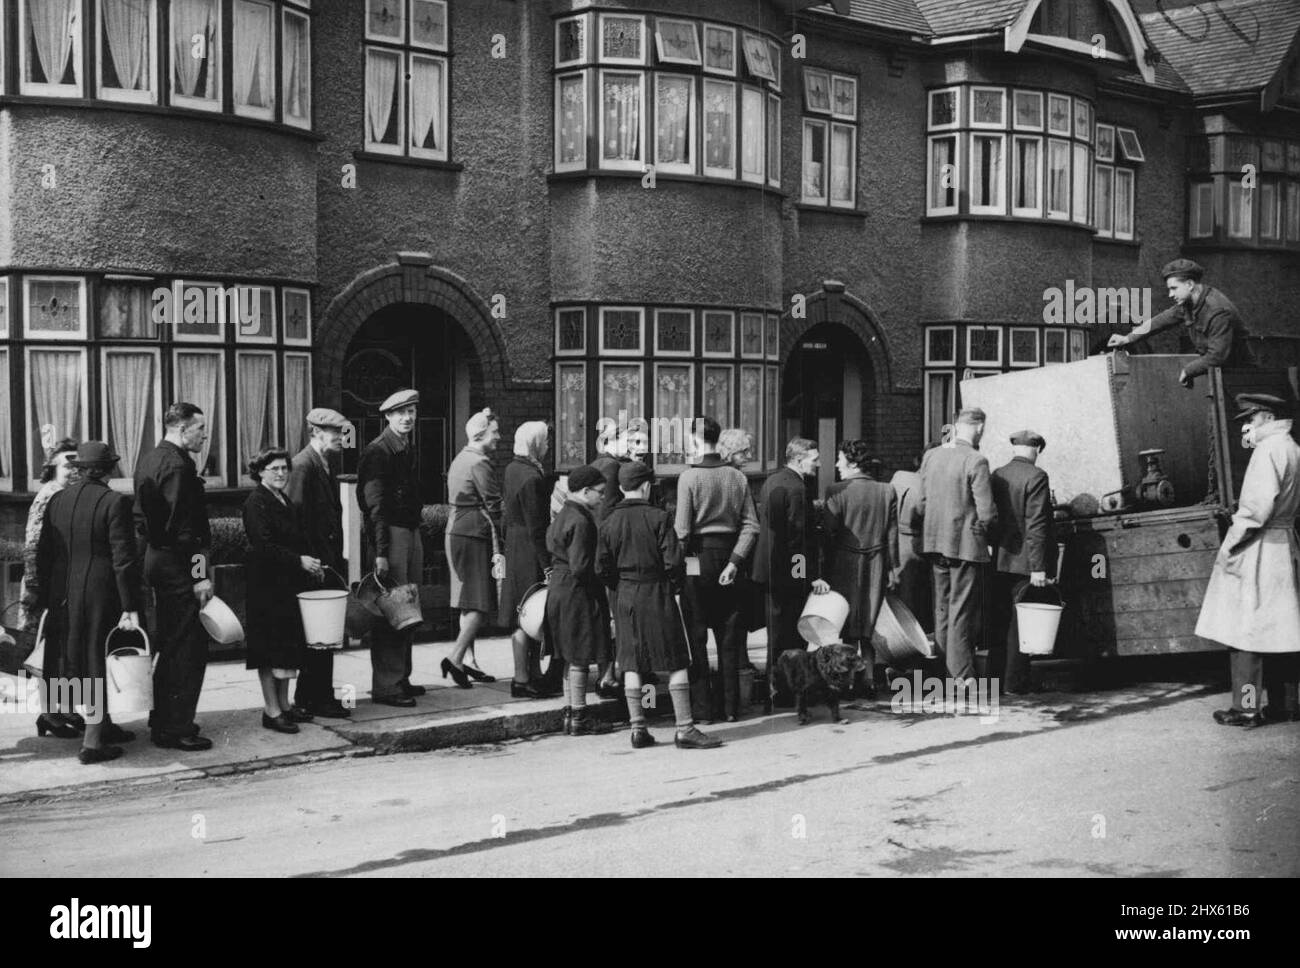 Troops To The Help Of Flooded London -- The long queue carrying every sort of utensil wait their turn as the Army water wagon brings their much needed supply. A picture from Clapton, London. Soldiers bringing with them many hundreds of mobile water tankers have now been called in to help in the flooded districts of London where large areas are completely without a domestic water supply owing to the rising flood waters overrunning the reservoirs and works. March 17, 1947. ;Troops To The Help Of Stock Photo